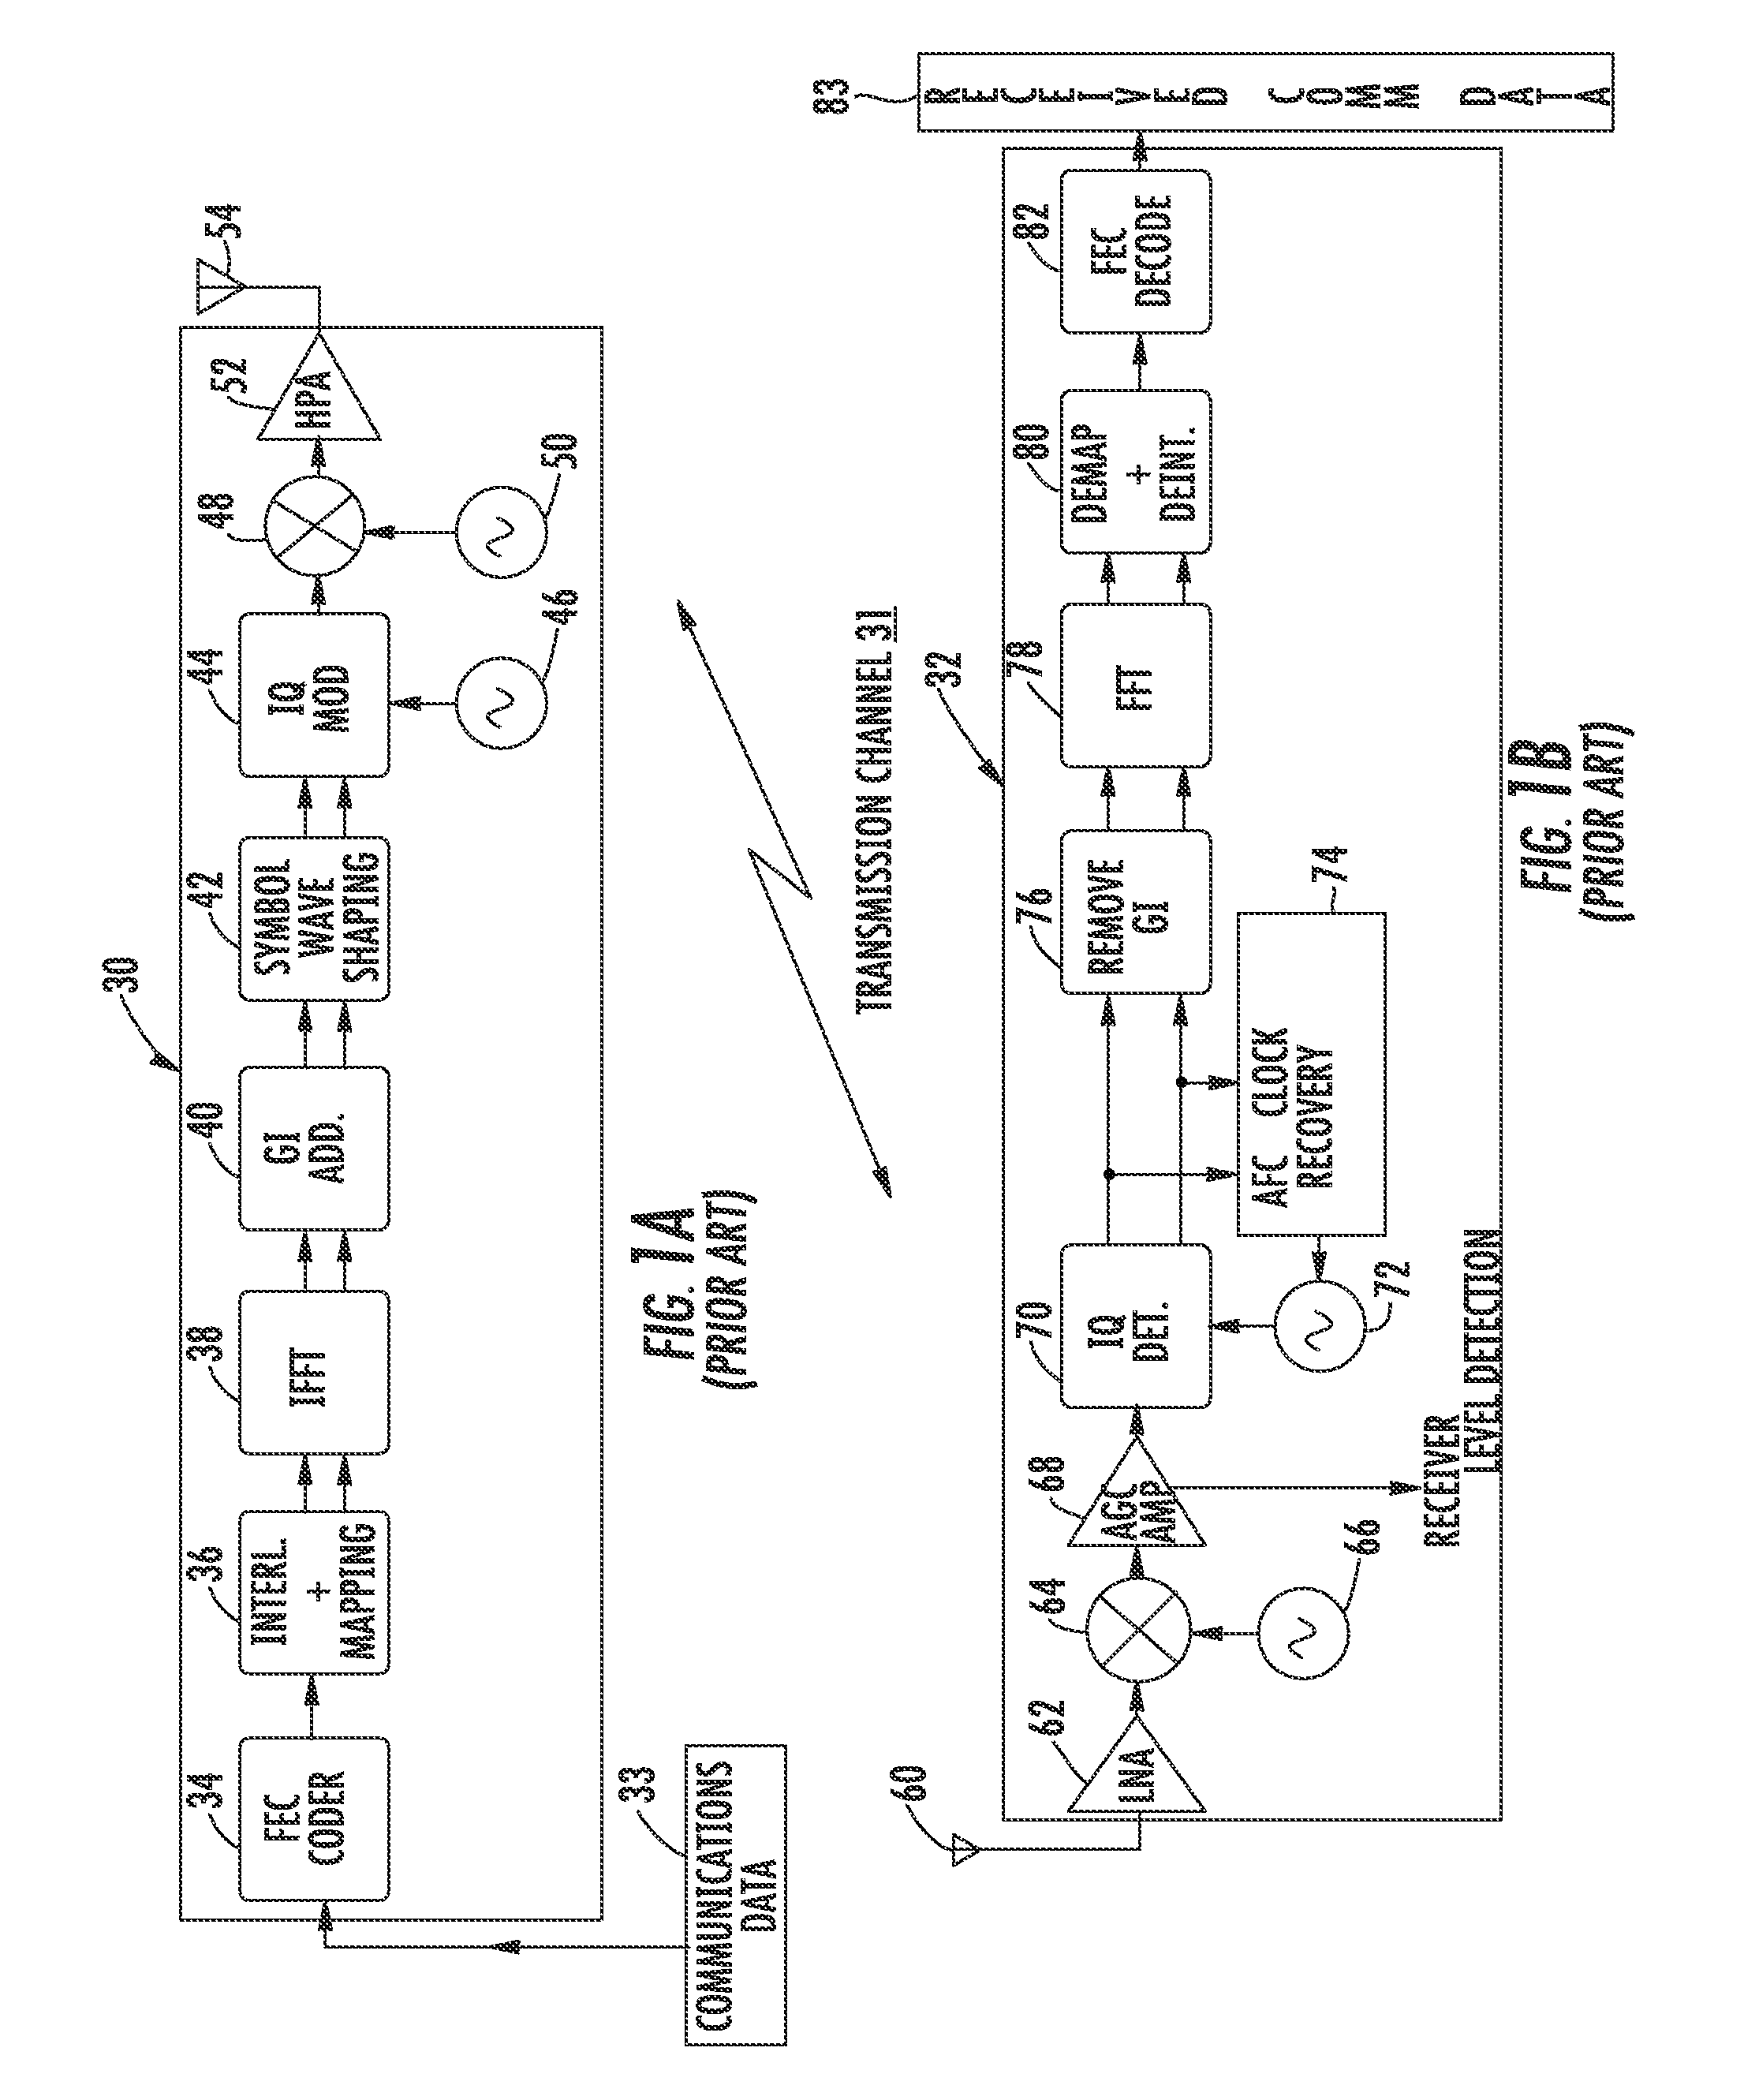 Orthogonal frequency division multiplexing (OFDM) communications device and method that incorporates low PAPR preamble and variable number of OFDM subcarriers